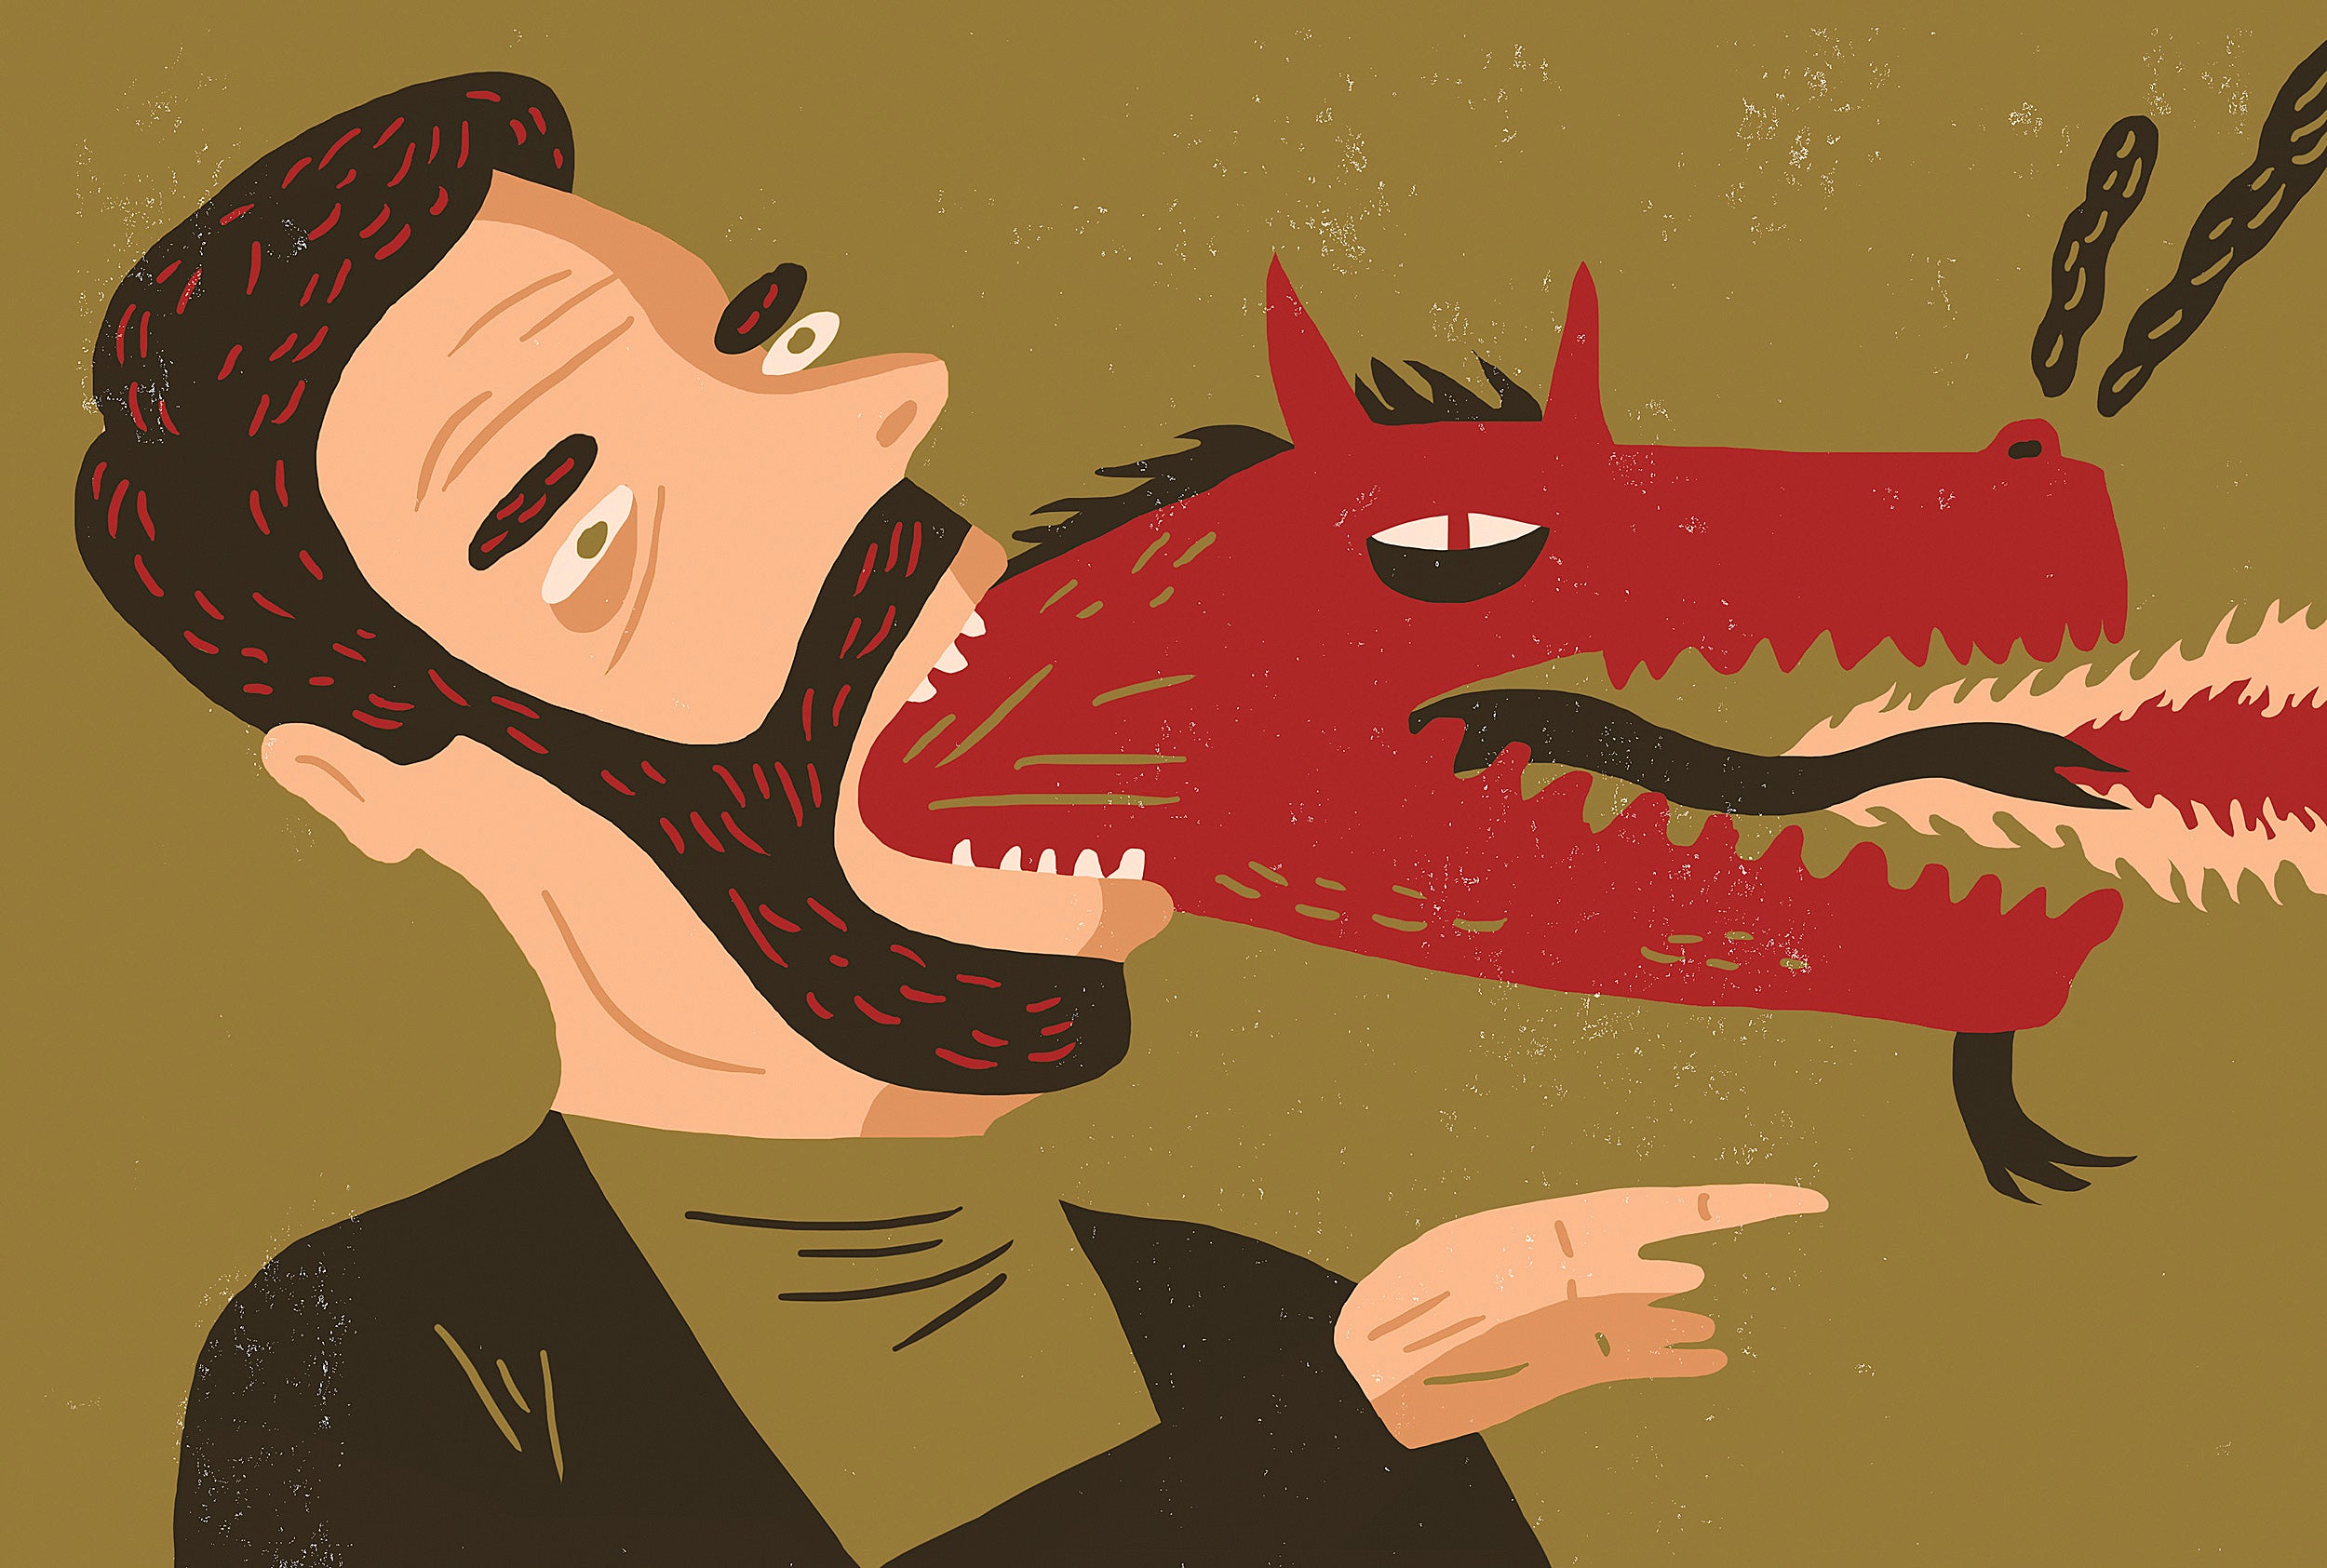 Illustration of a dragon coming out of person's mouth.